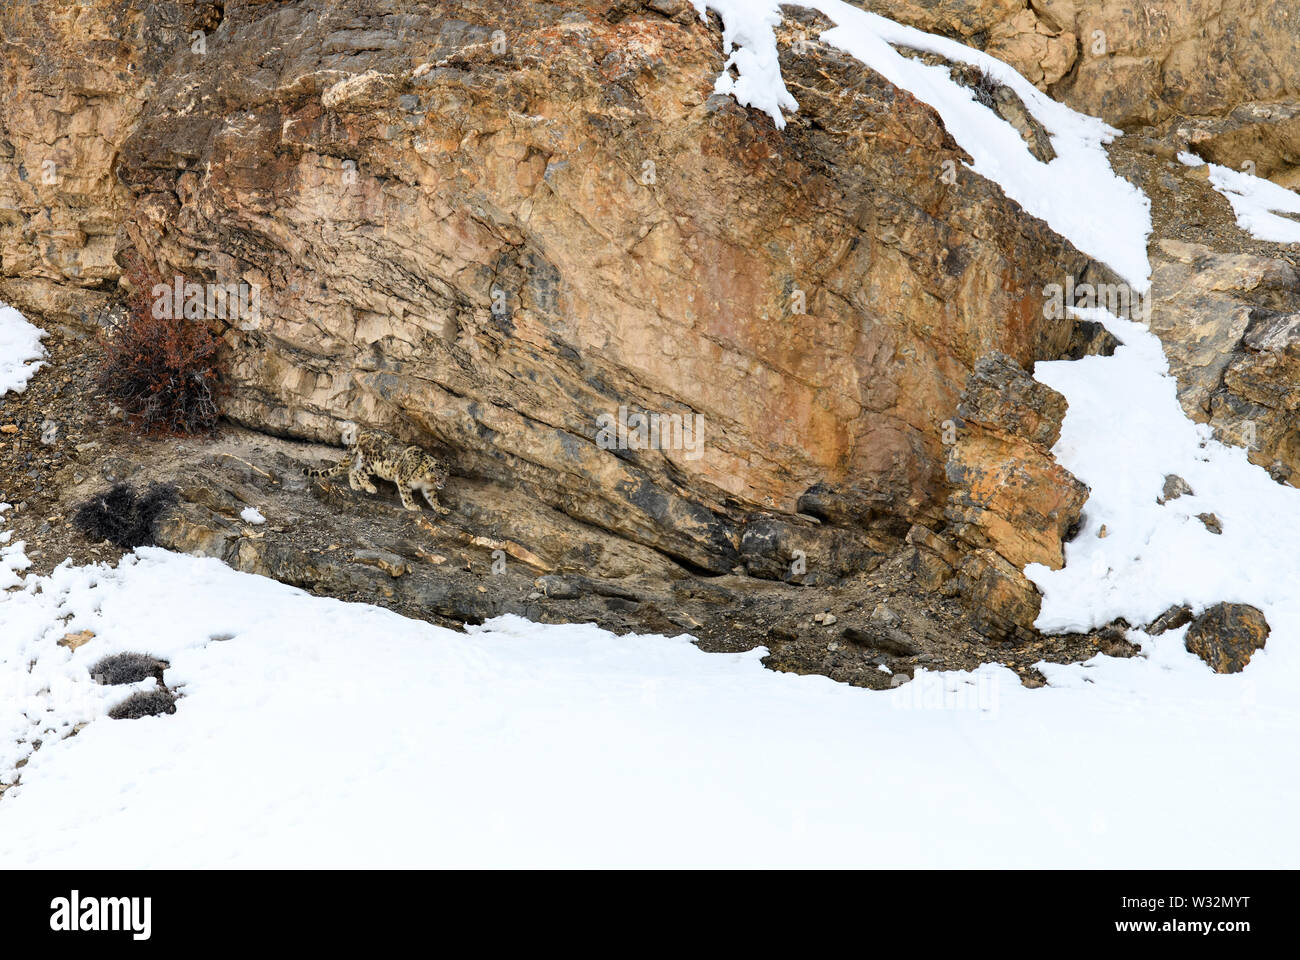 Gray ghost of Himalayas (Snow Leopard), killing and eating an Ibex, Highly camoflaged hiding animal in mountains, in extreme climatic condition Stock Photo